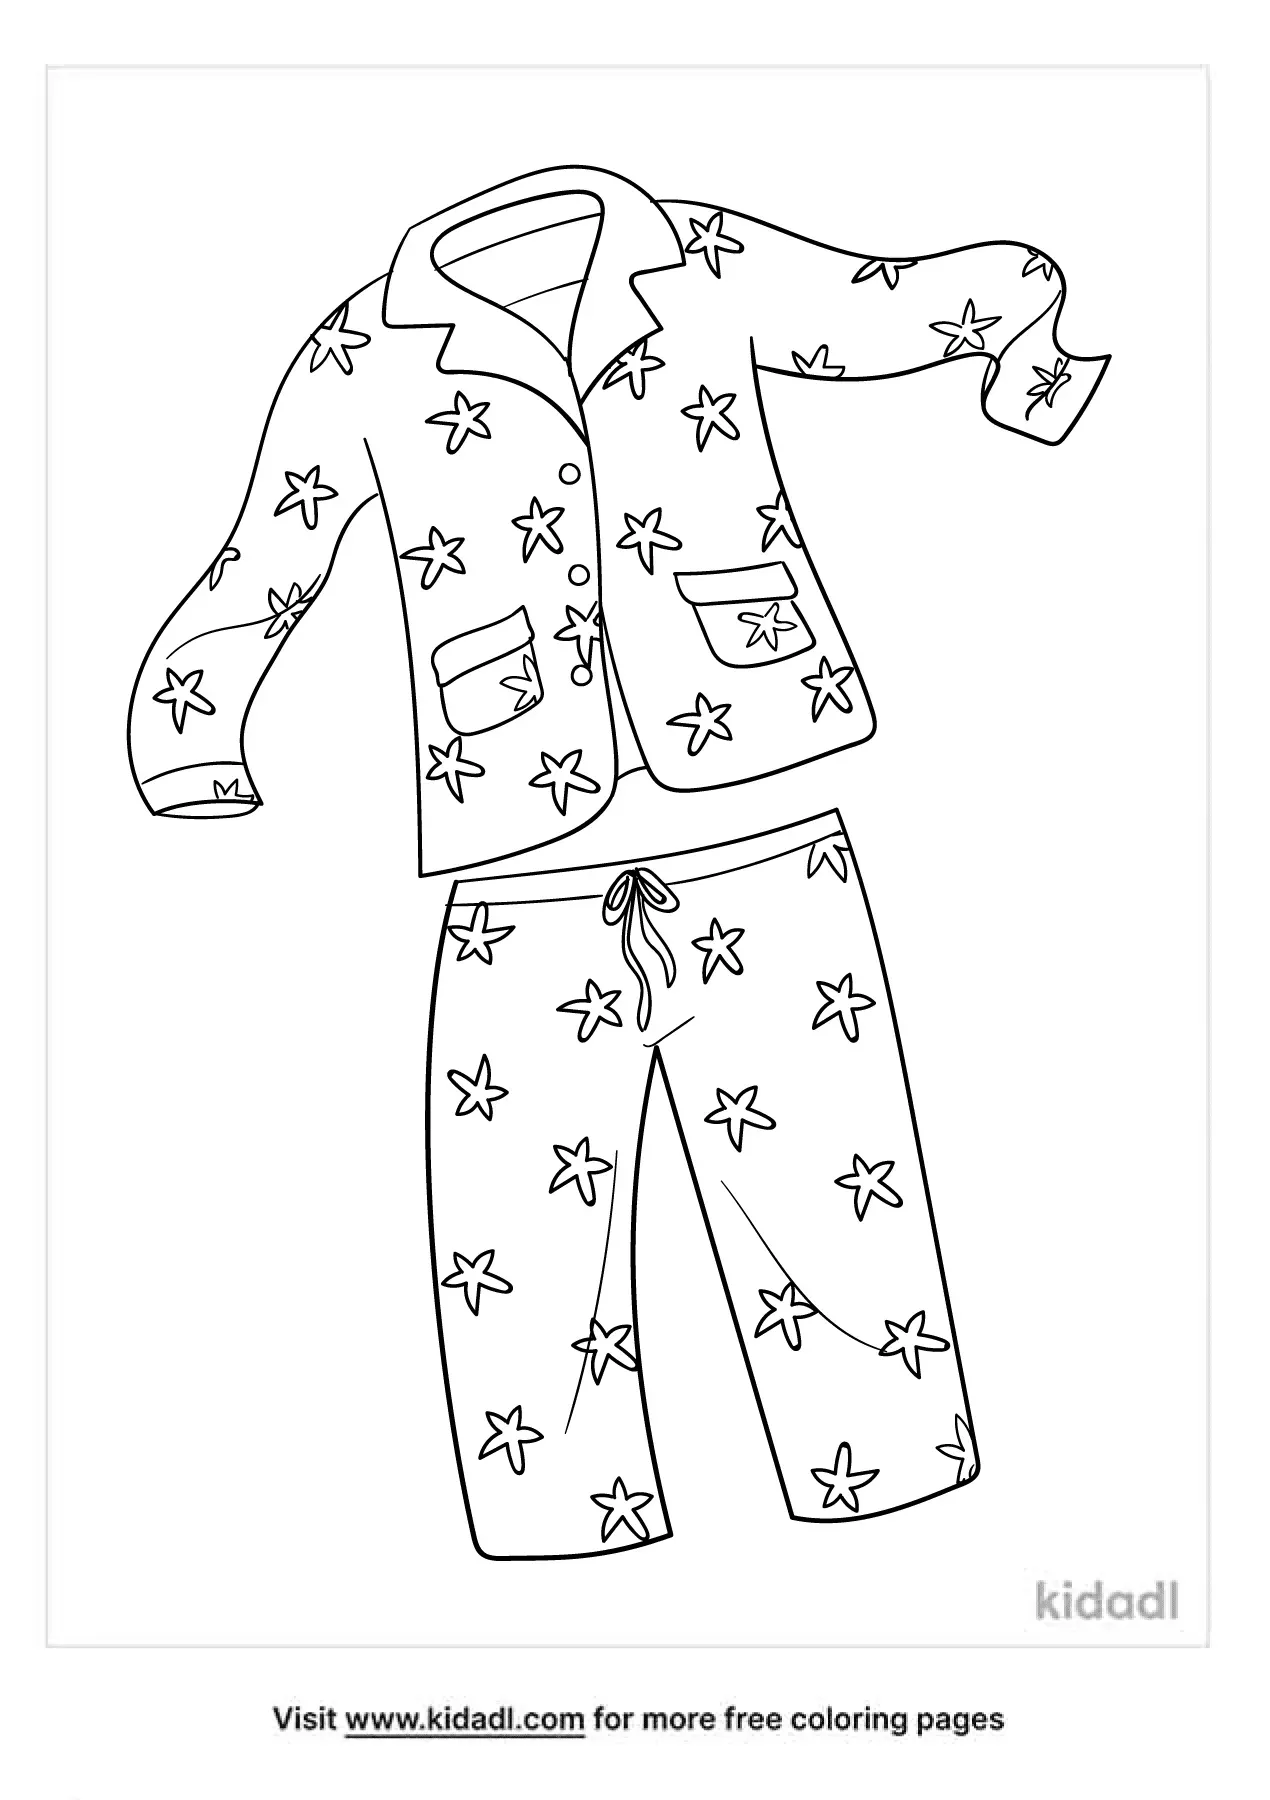 Laces Coloring Page | Free Fashion Coloring Page | Kidadl